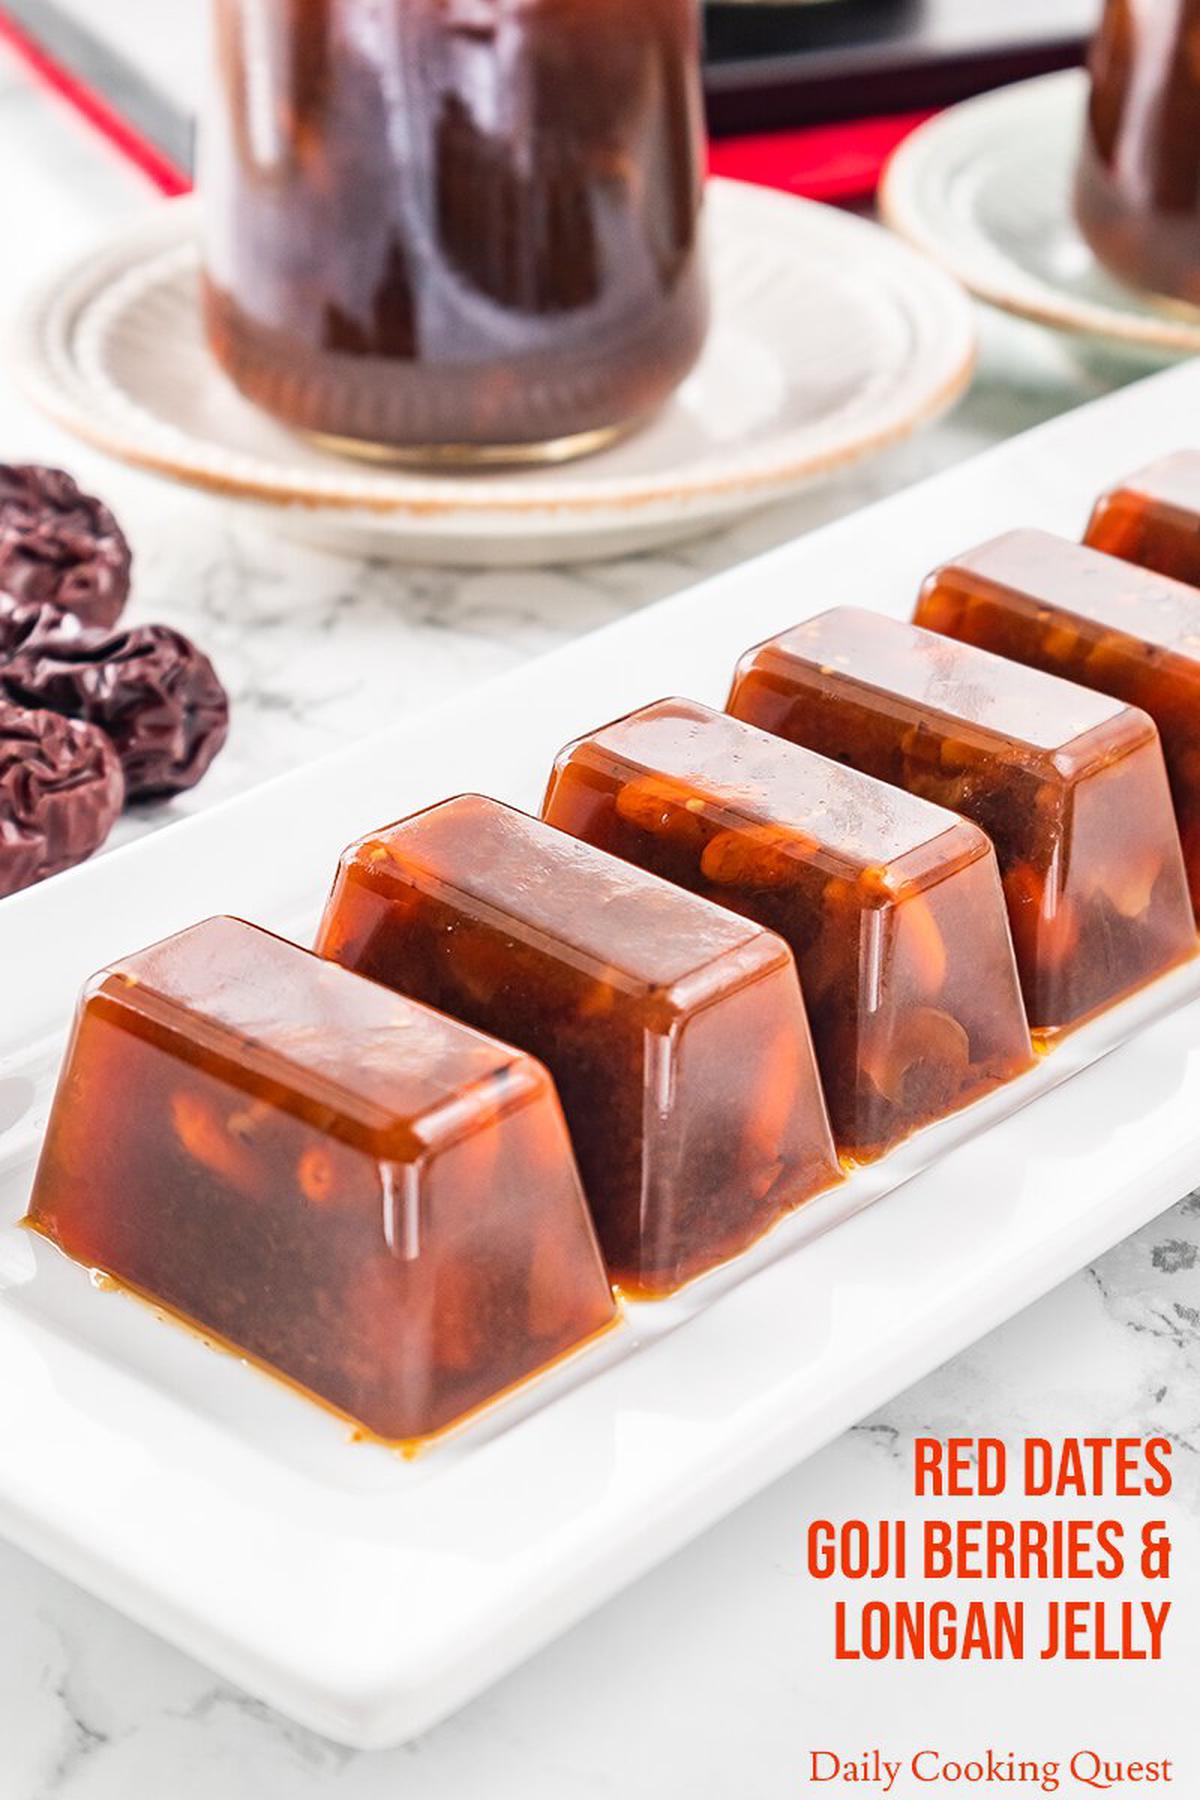 Red Dates, Goji Berries, and Longan Jelly | Daily Cooking Quest